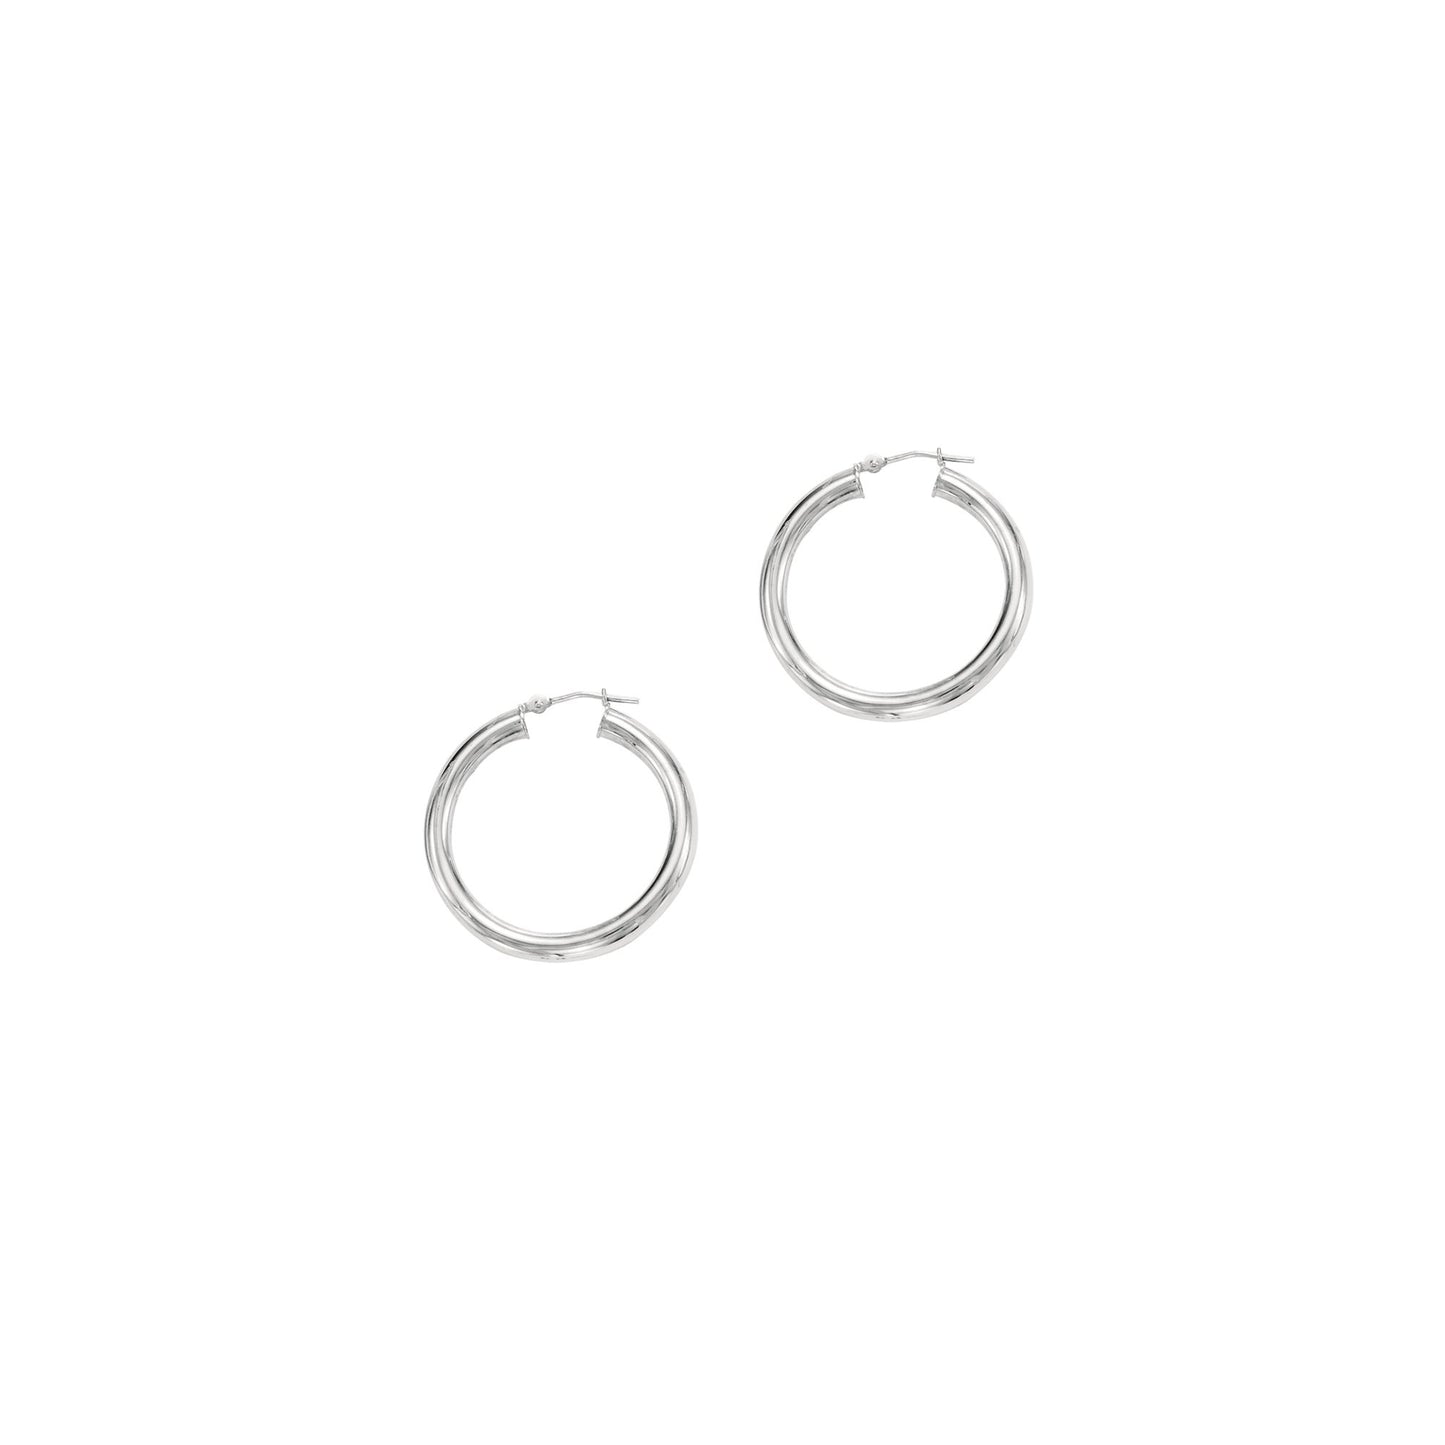 Polished 14K Gold Round Hoop Earring with Hinged Clasp